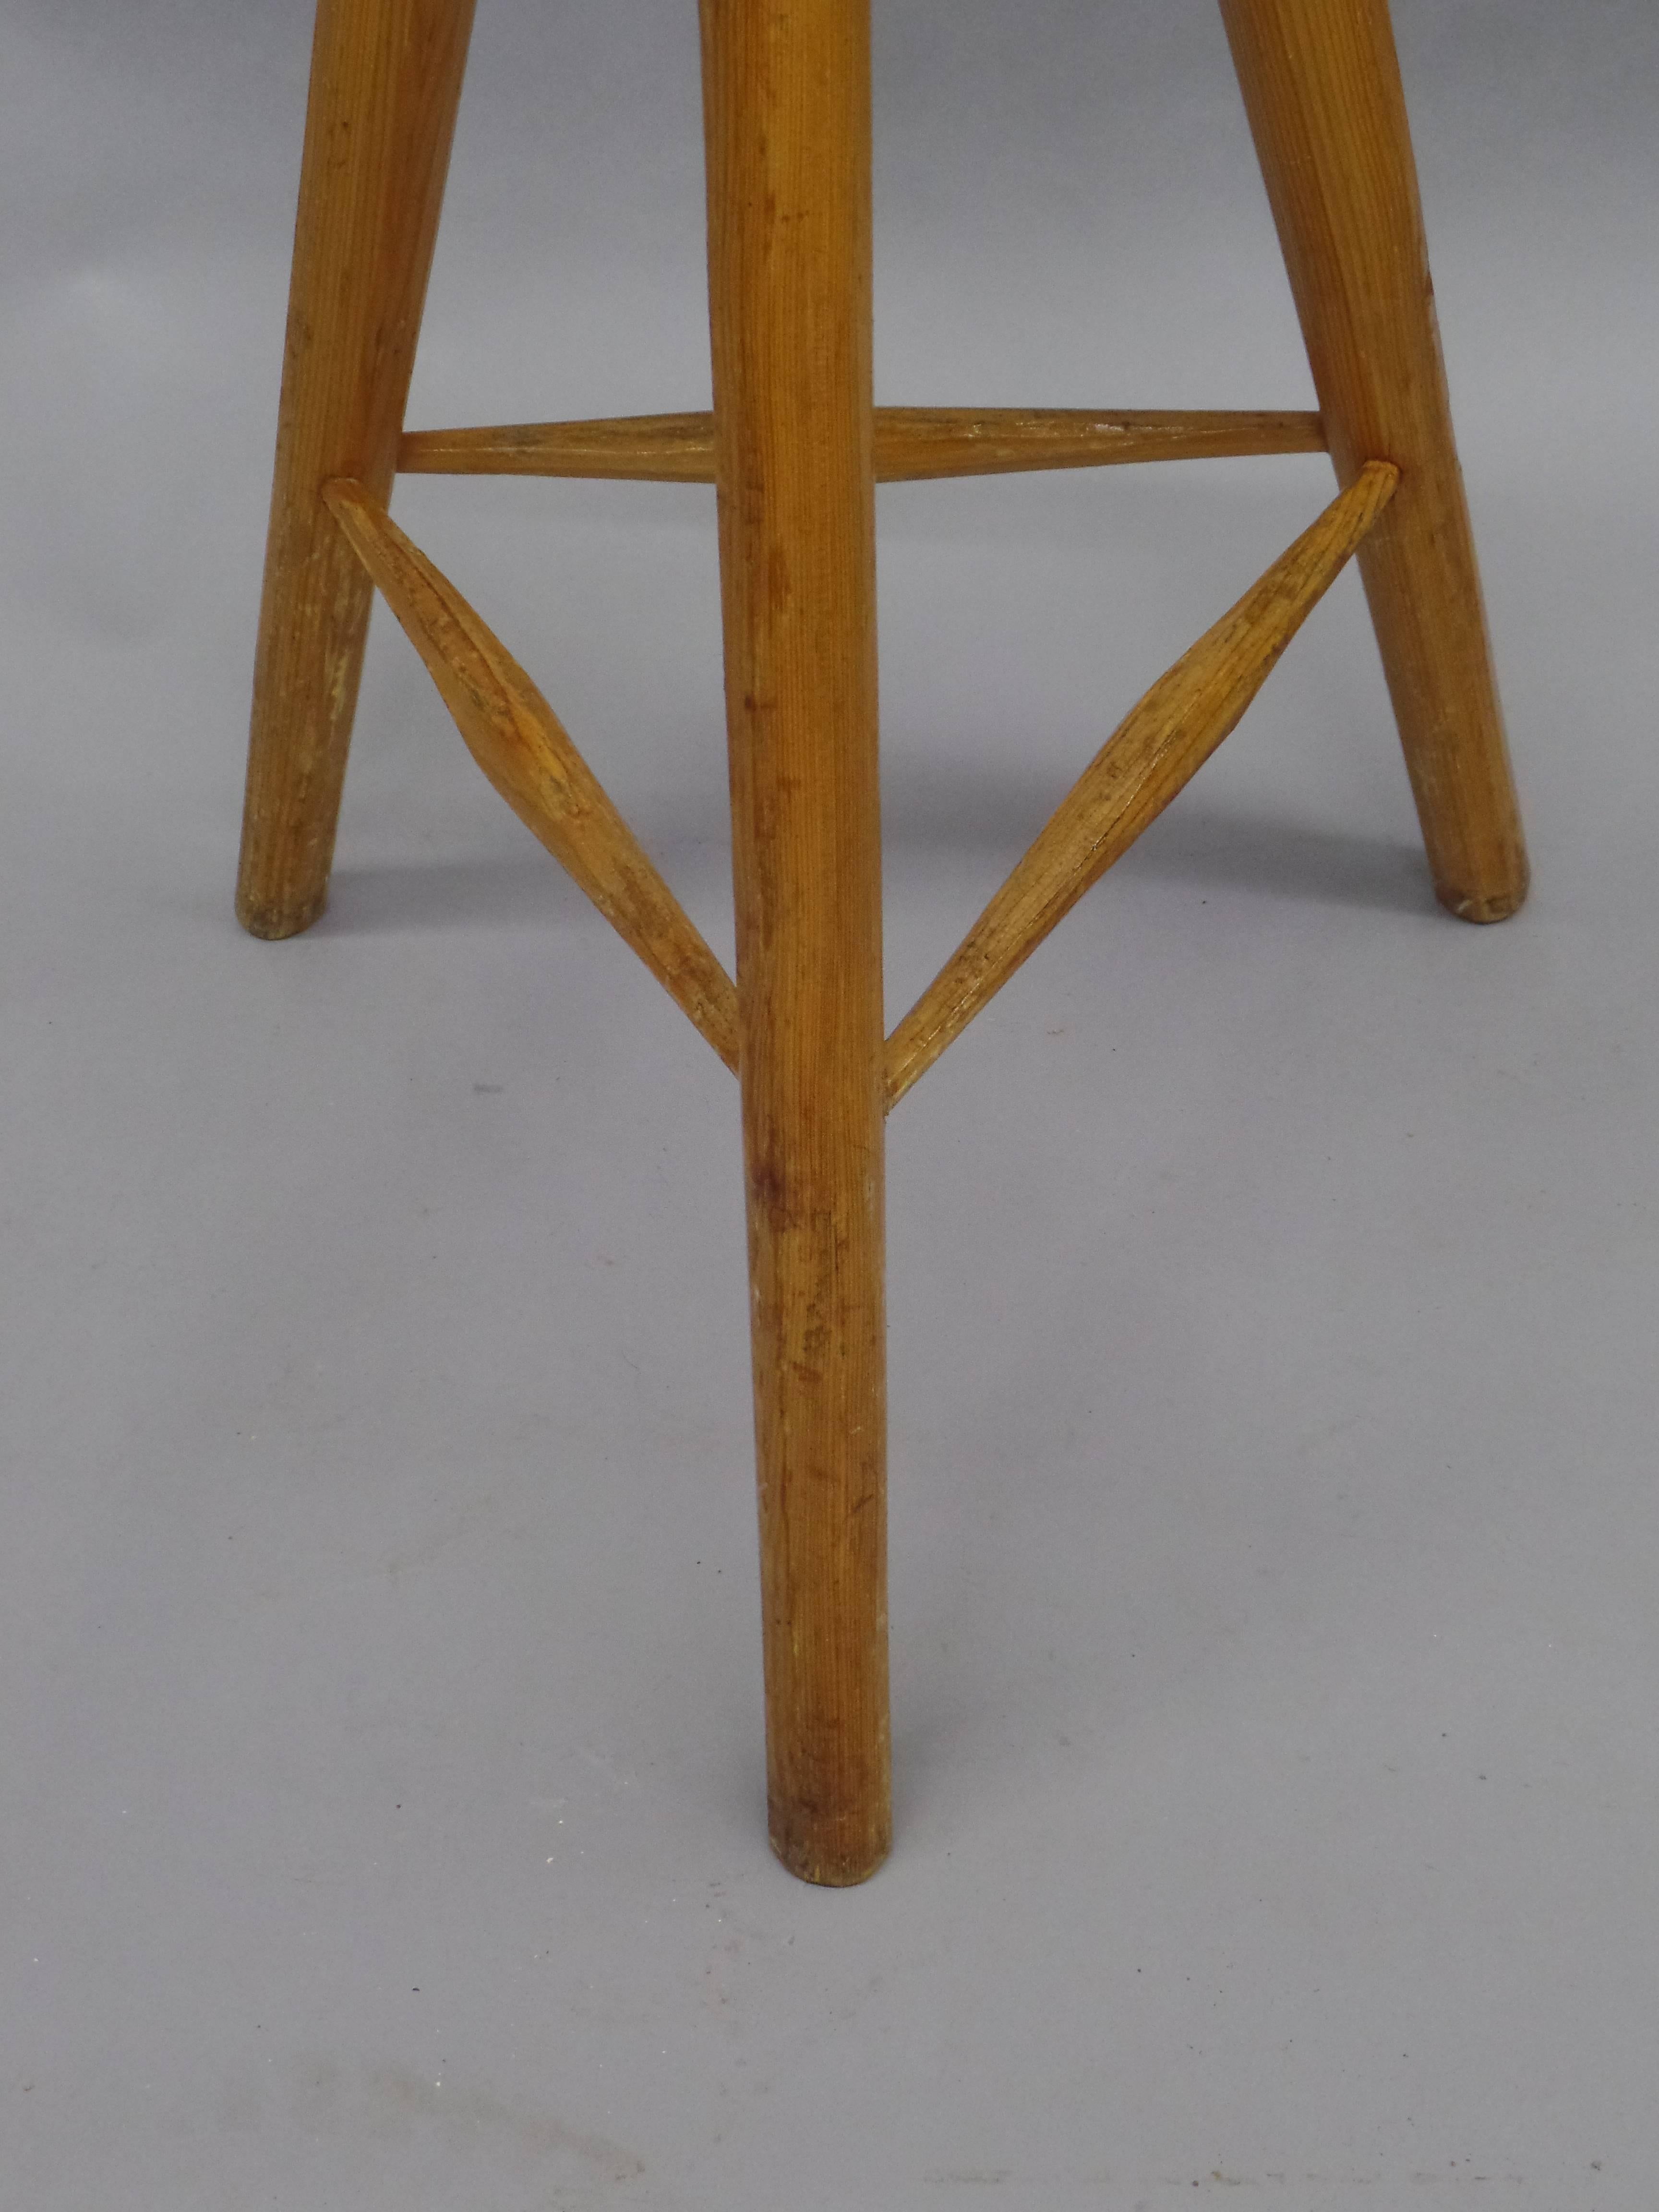 Three French Mid-Century Modern Brutalist Style Wood Bar Stools For Sale 1